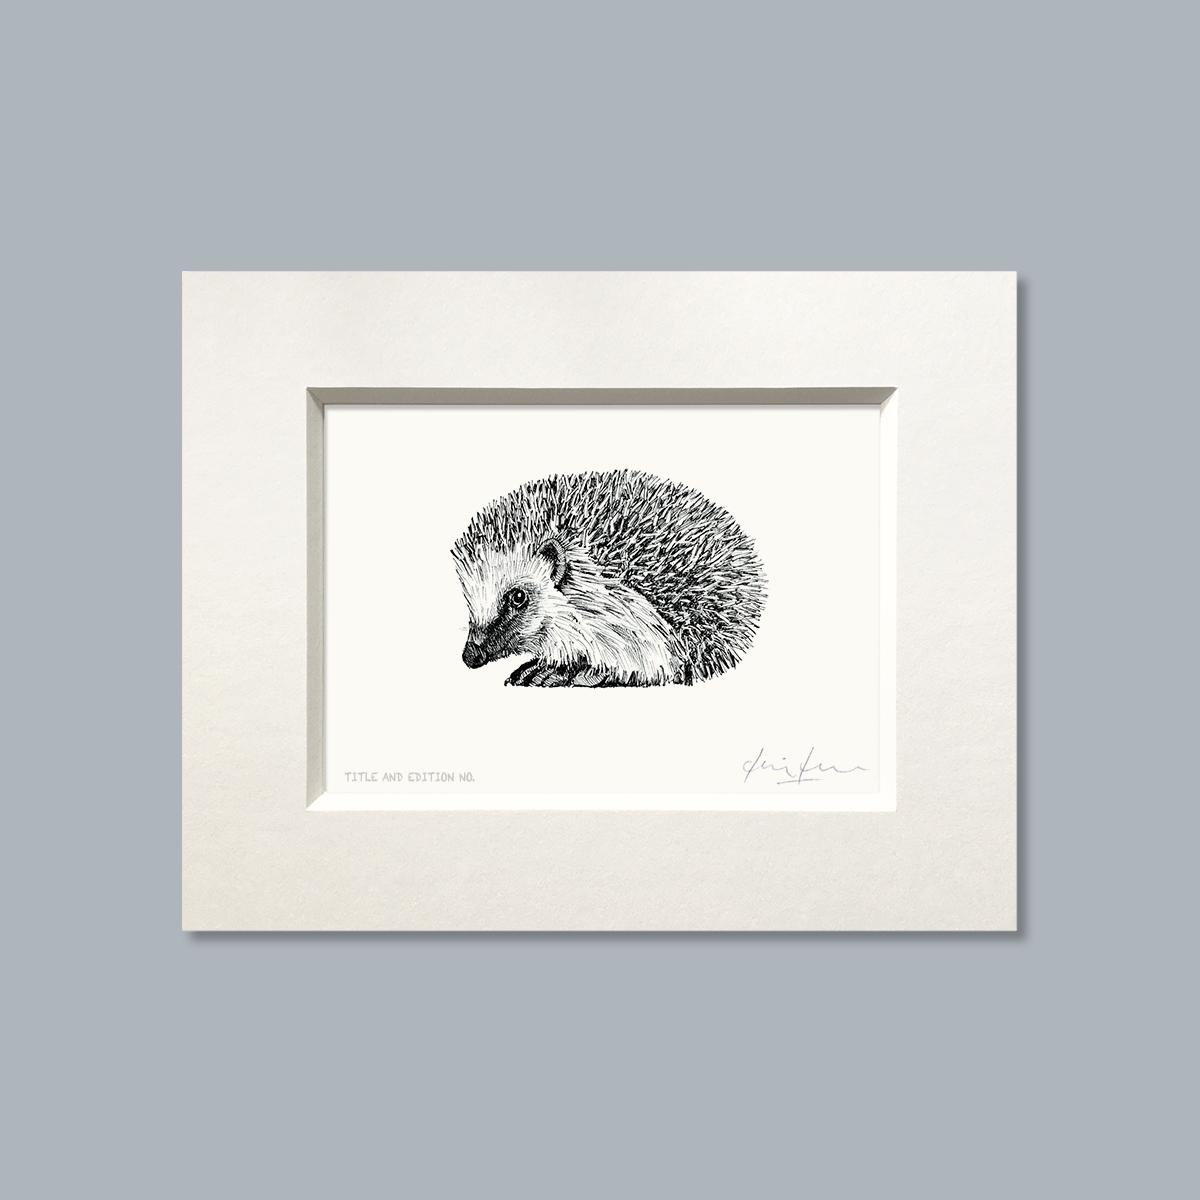 Limited edition print from pen and ink drawing of a hedgehog, mounted only